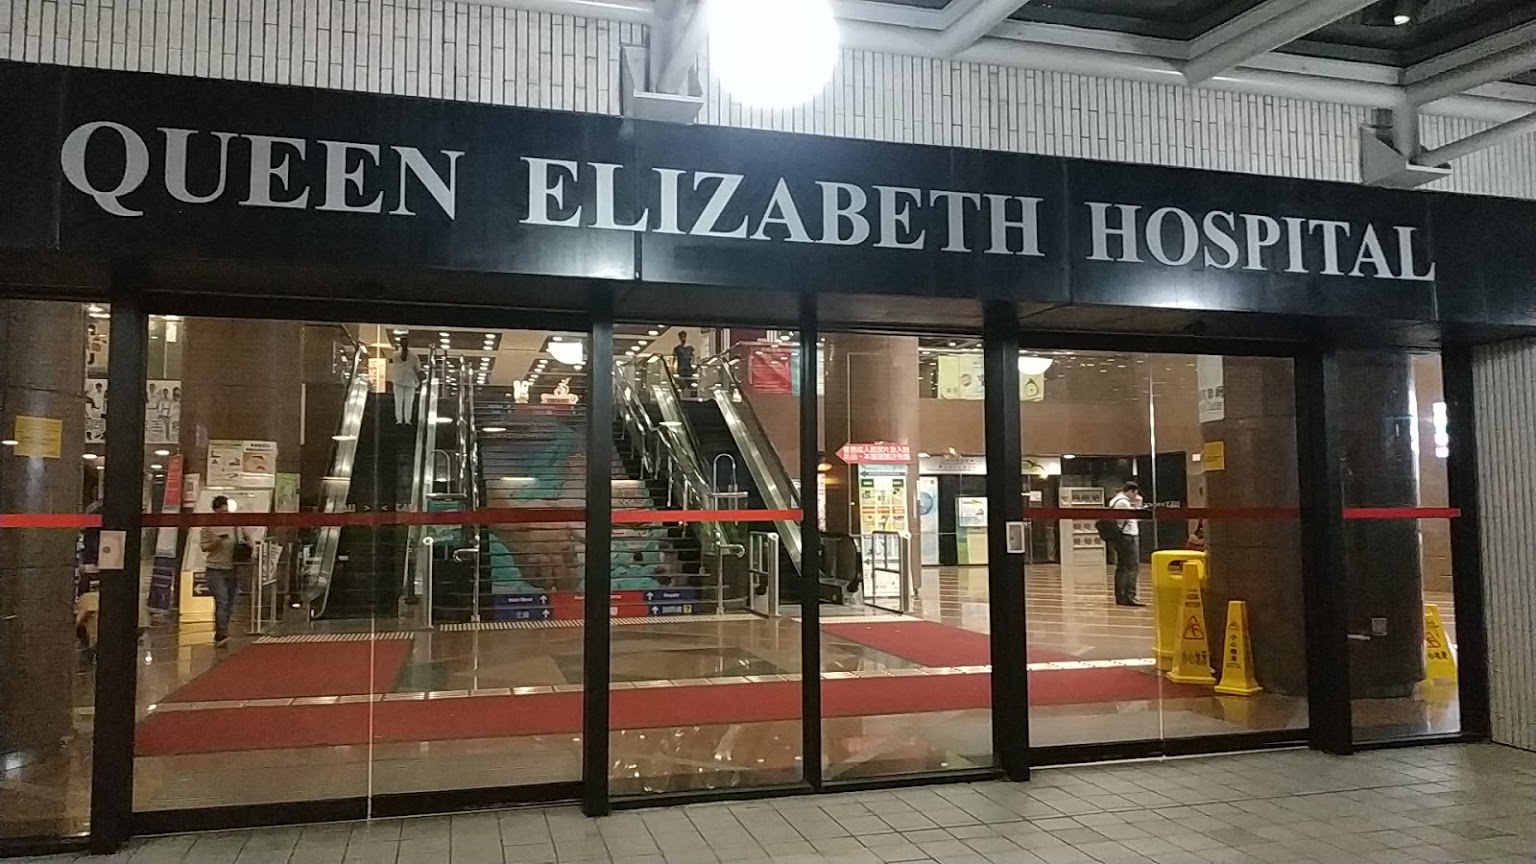 The woman was admitted to Queen Elizabeth Hospital, where she required breathing assistance throughout her six-day stay before succumbing to the virus. Photo via Google/Dankie Chow